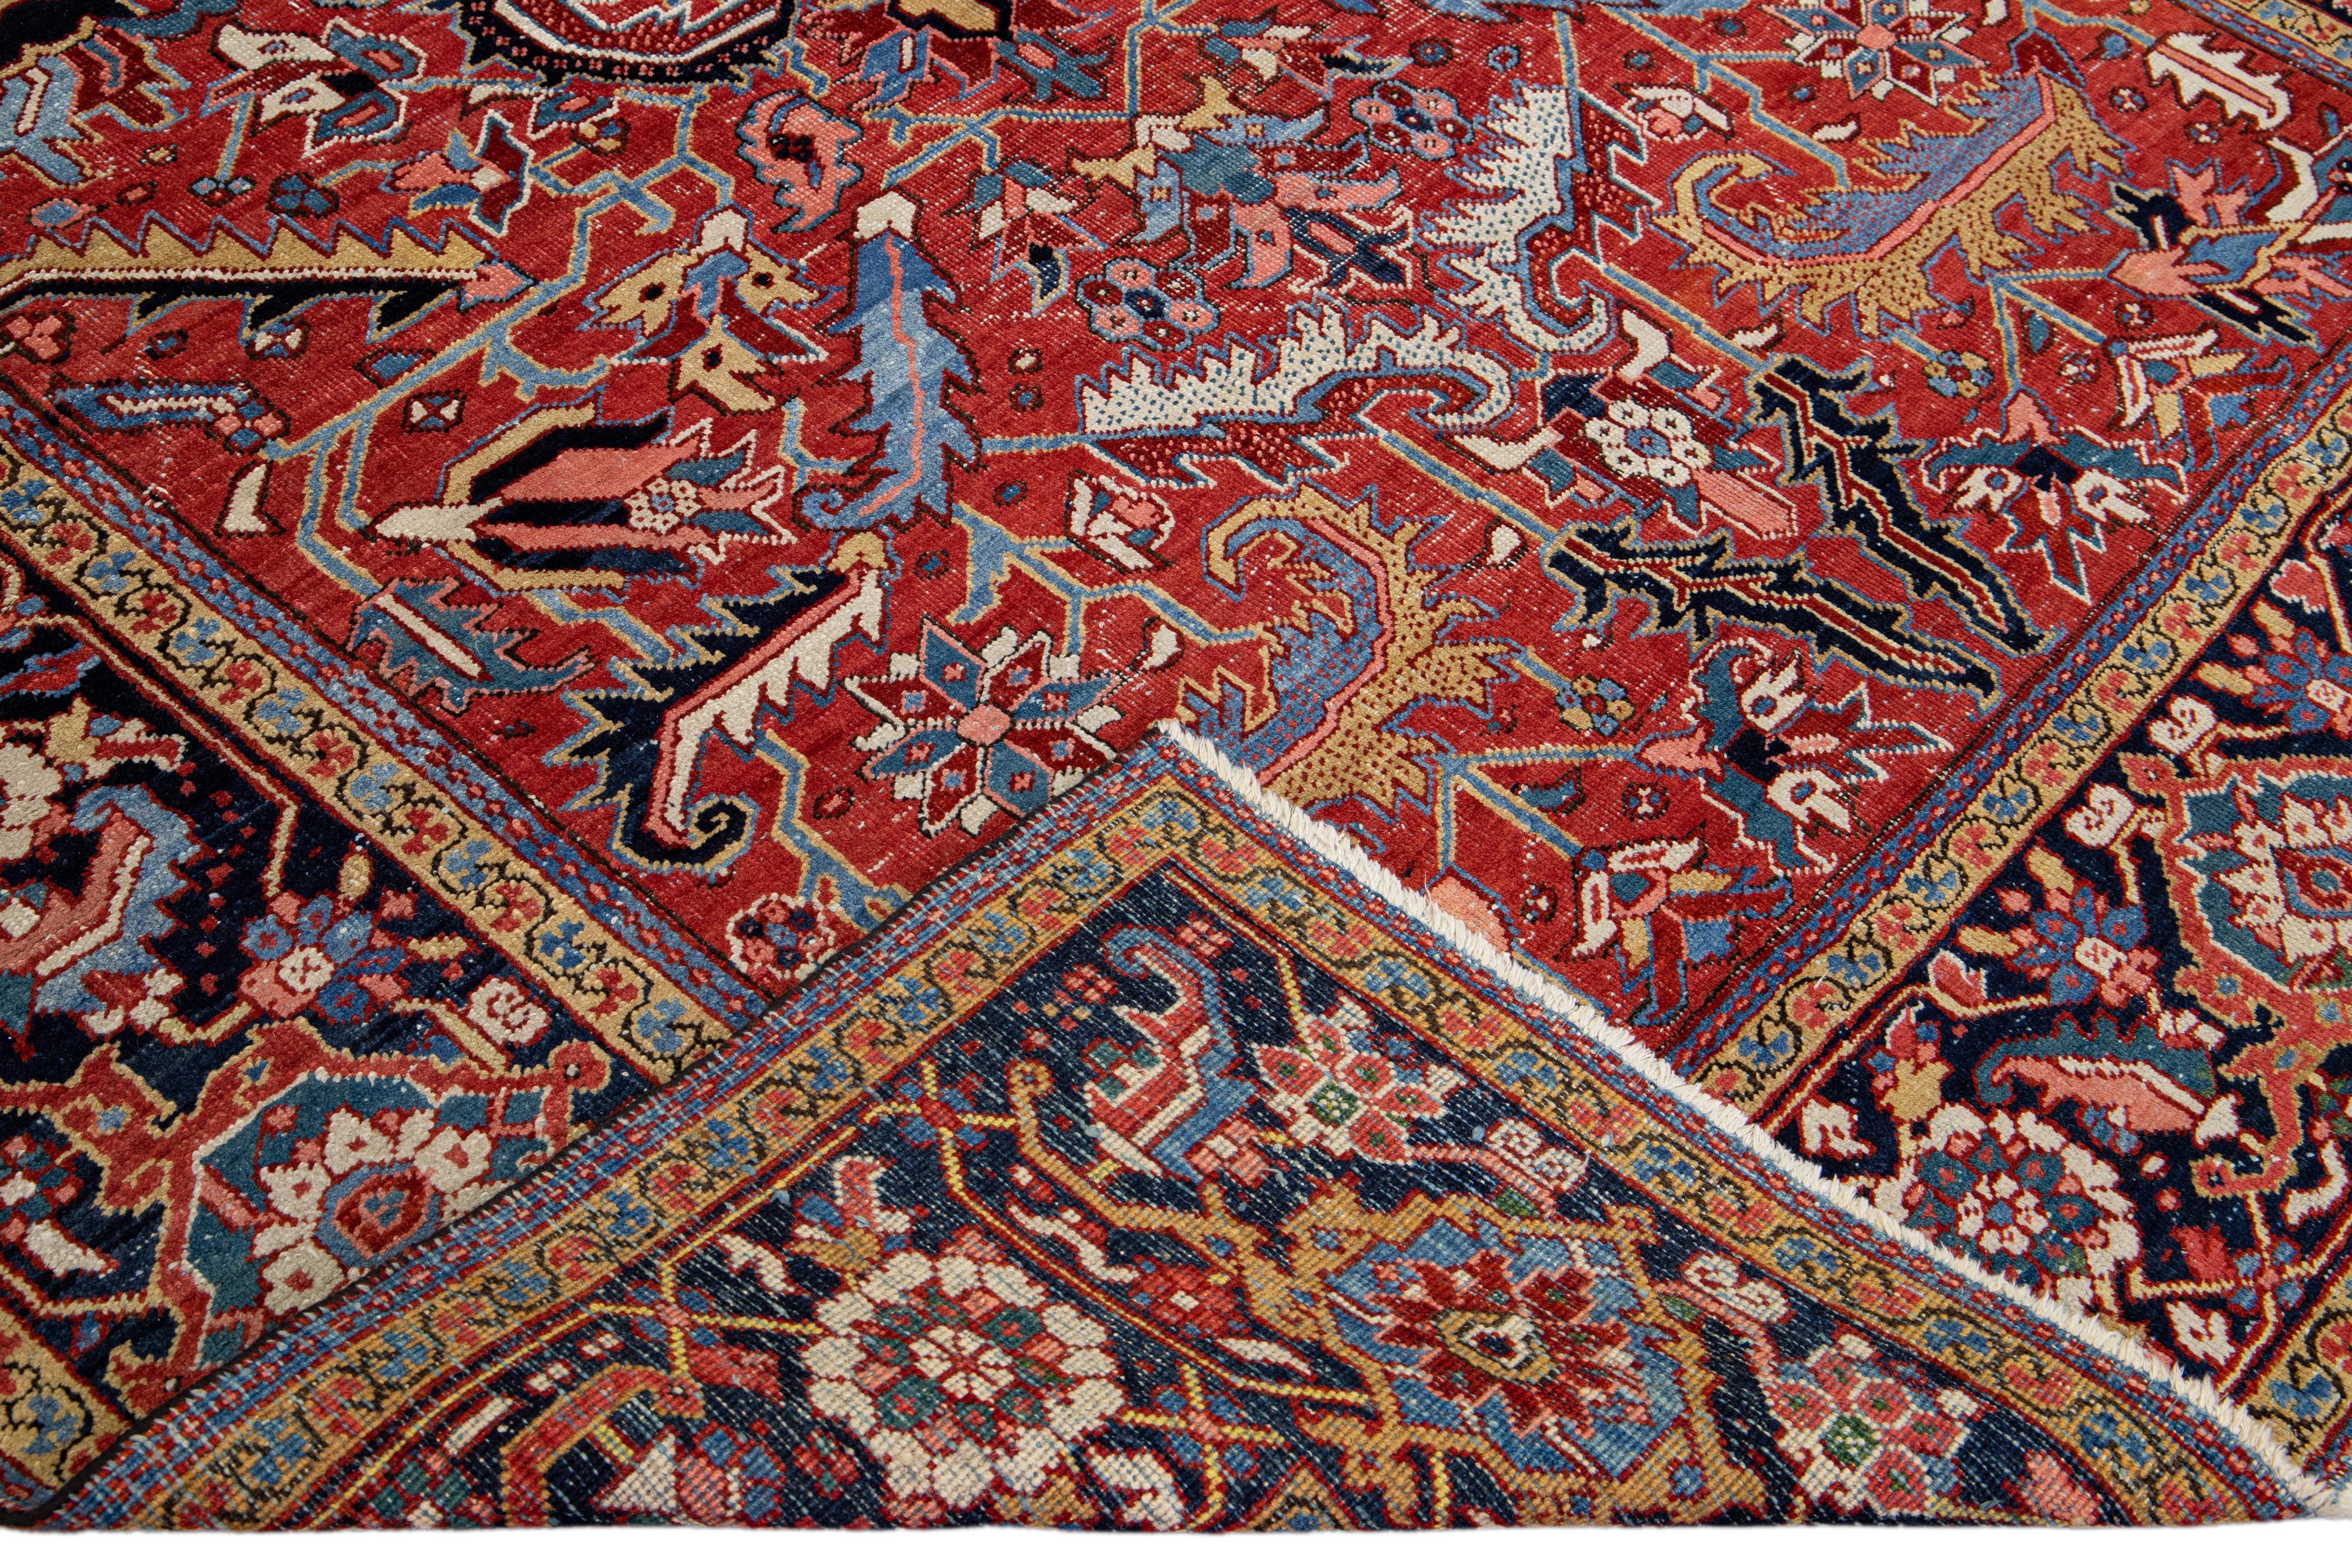 Beautiful antique Heriz hand-knotted wool rug with a red field. This Heriz rug has a navy-blue frame and multi-color accents in a gorgeous all-over geometric floral design.

This rug measures: 8' x 11'4